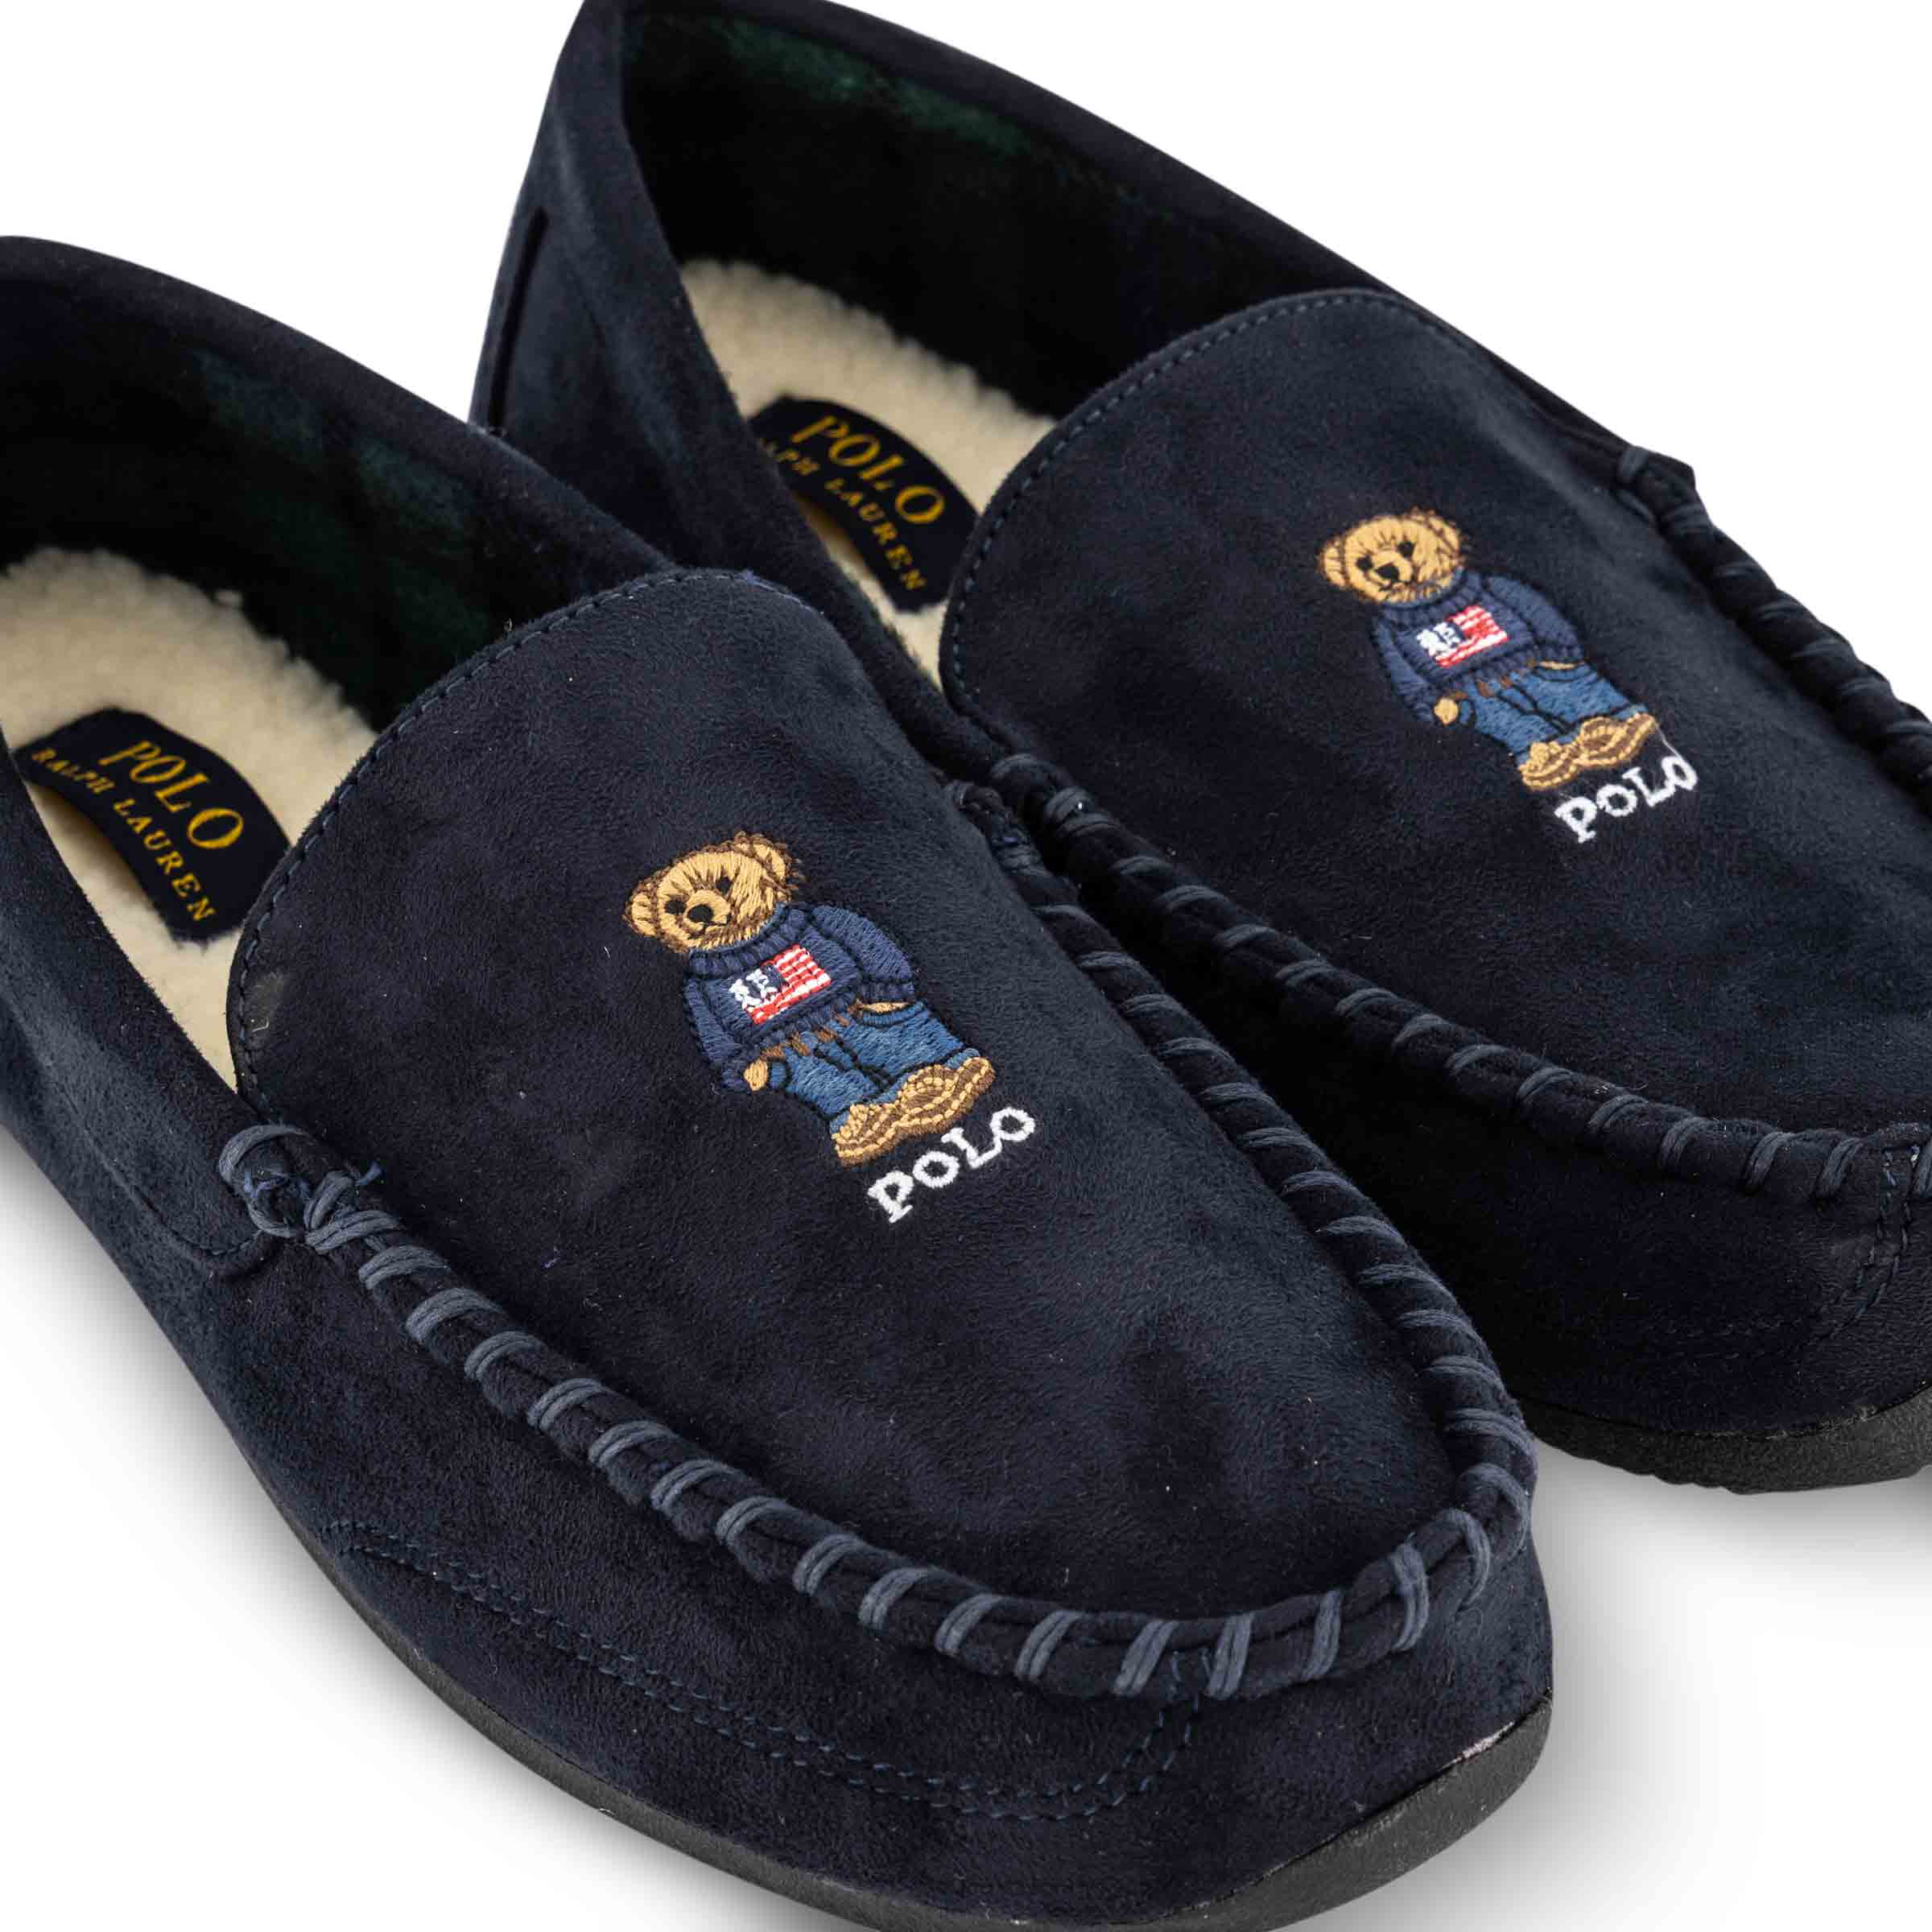 Ralph Lauren Purple Label Size 9 Polo Bear Slippers Shoes Made in Italy New  Box | eBay